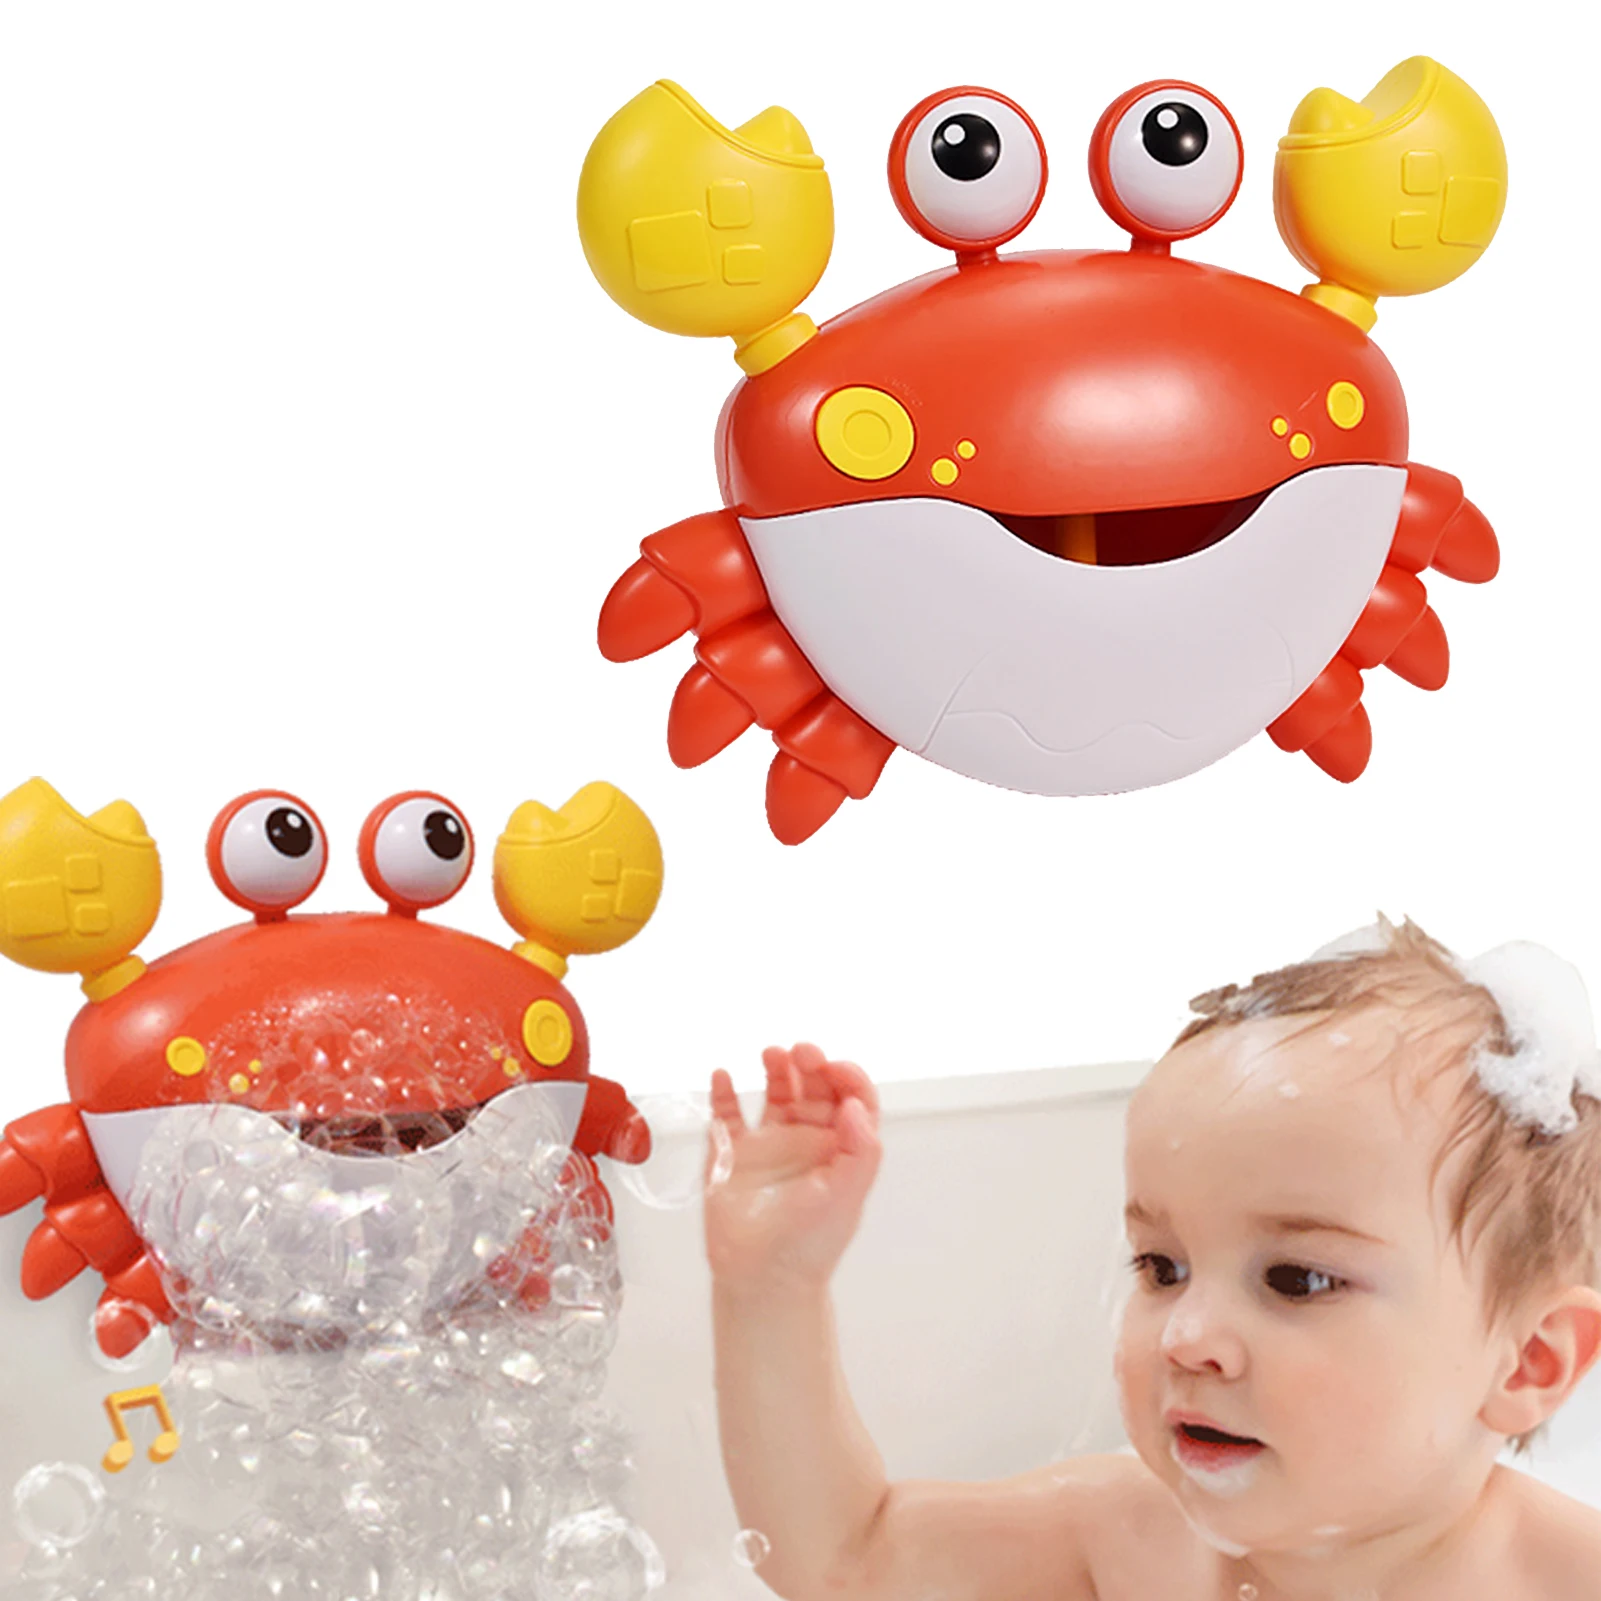 

Crab Baby Bubble Bath Toy Automatic Bubble Blower Maker For Bathtub Toys Play Children's Songs Bath Wall Toy For Toddlers